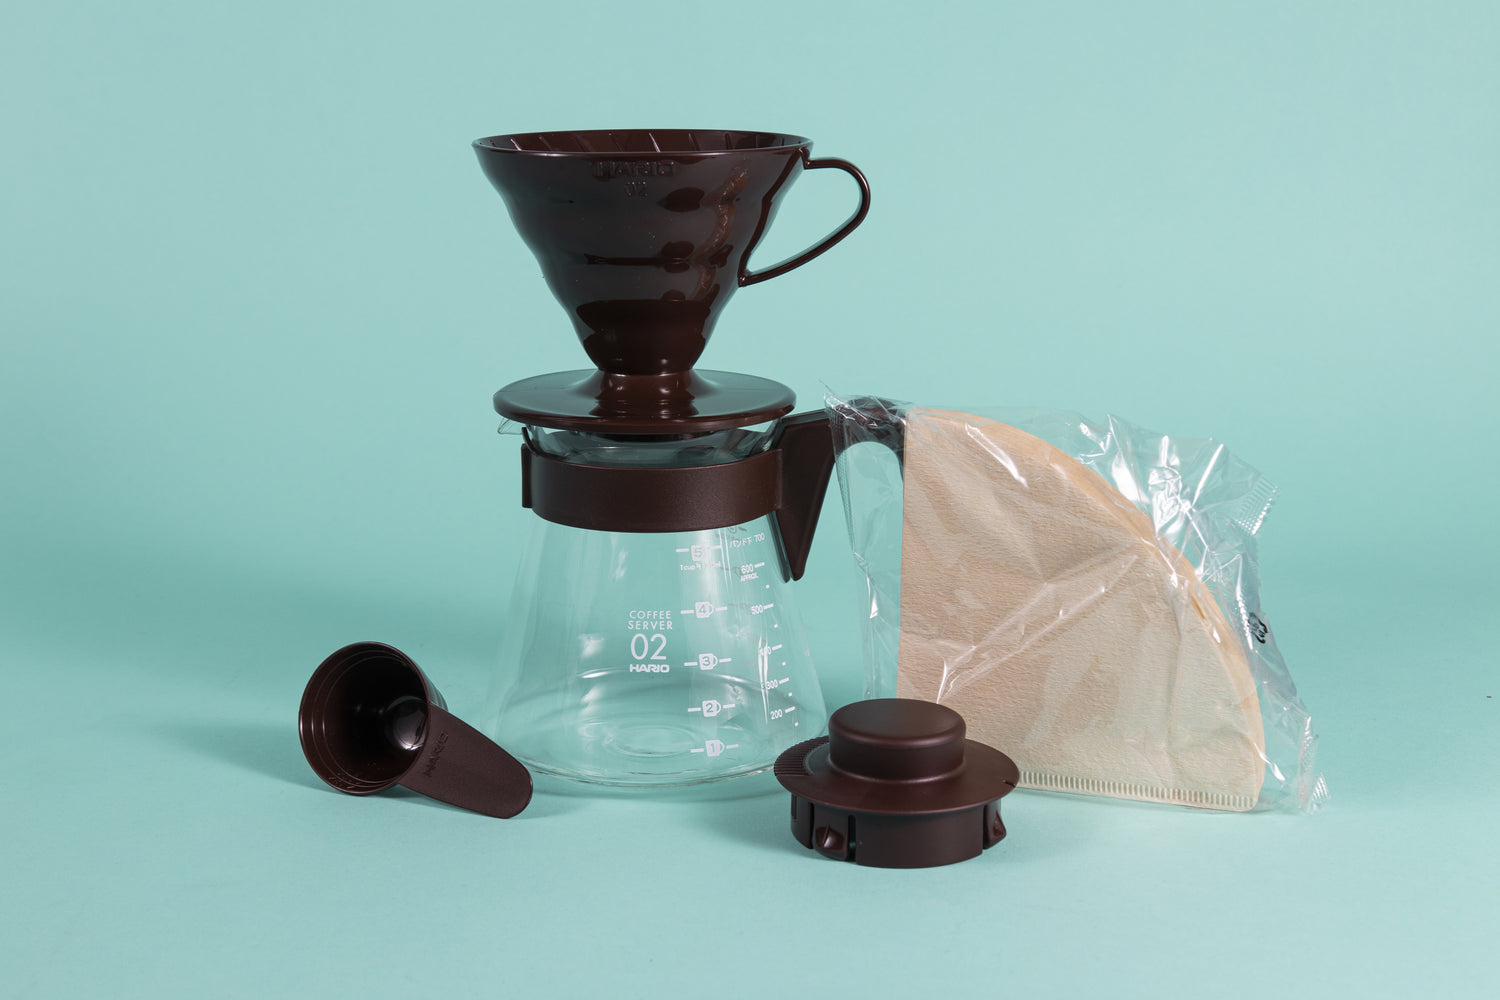 Chocolate brown cone shaped plastic dripper sitting on a glass server with brown plastic handle next to a pack of brown filters and brown plastic lid and scoop.